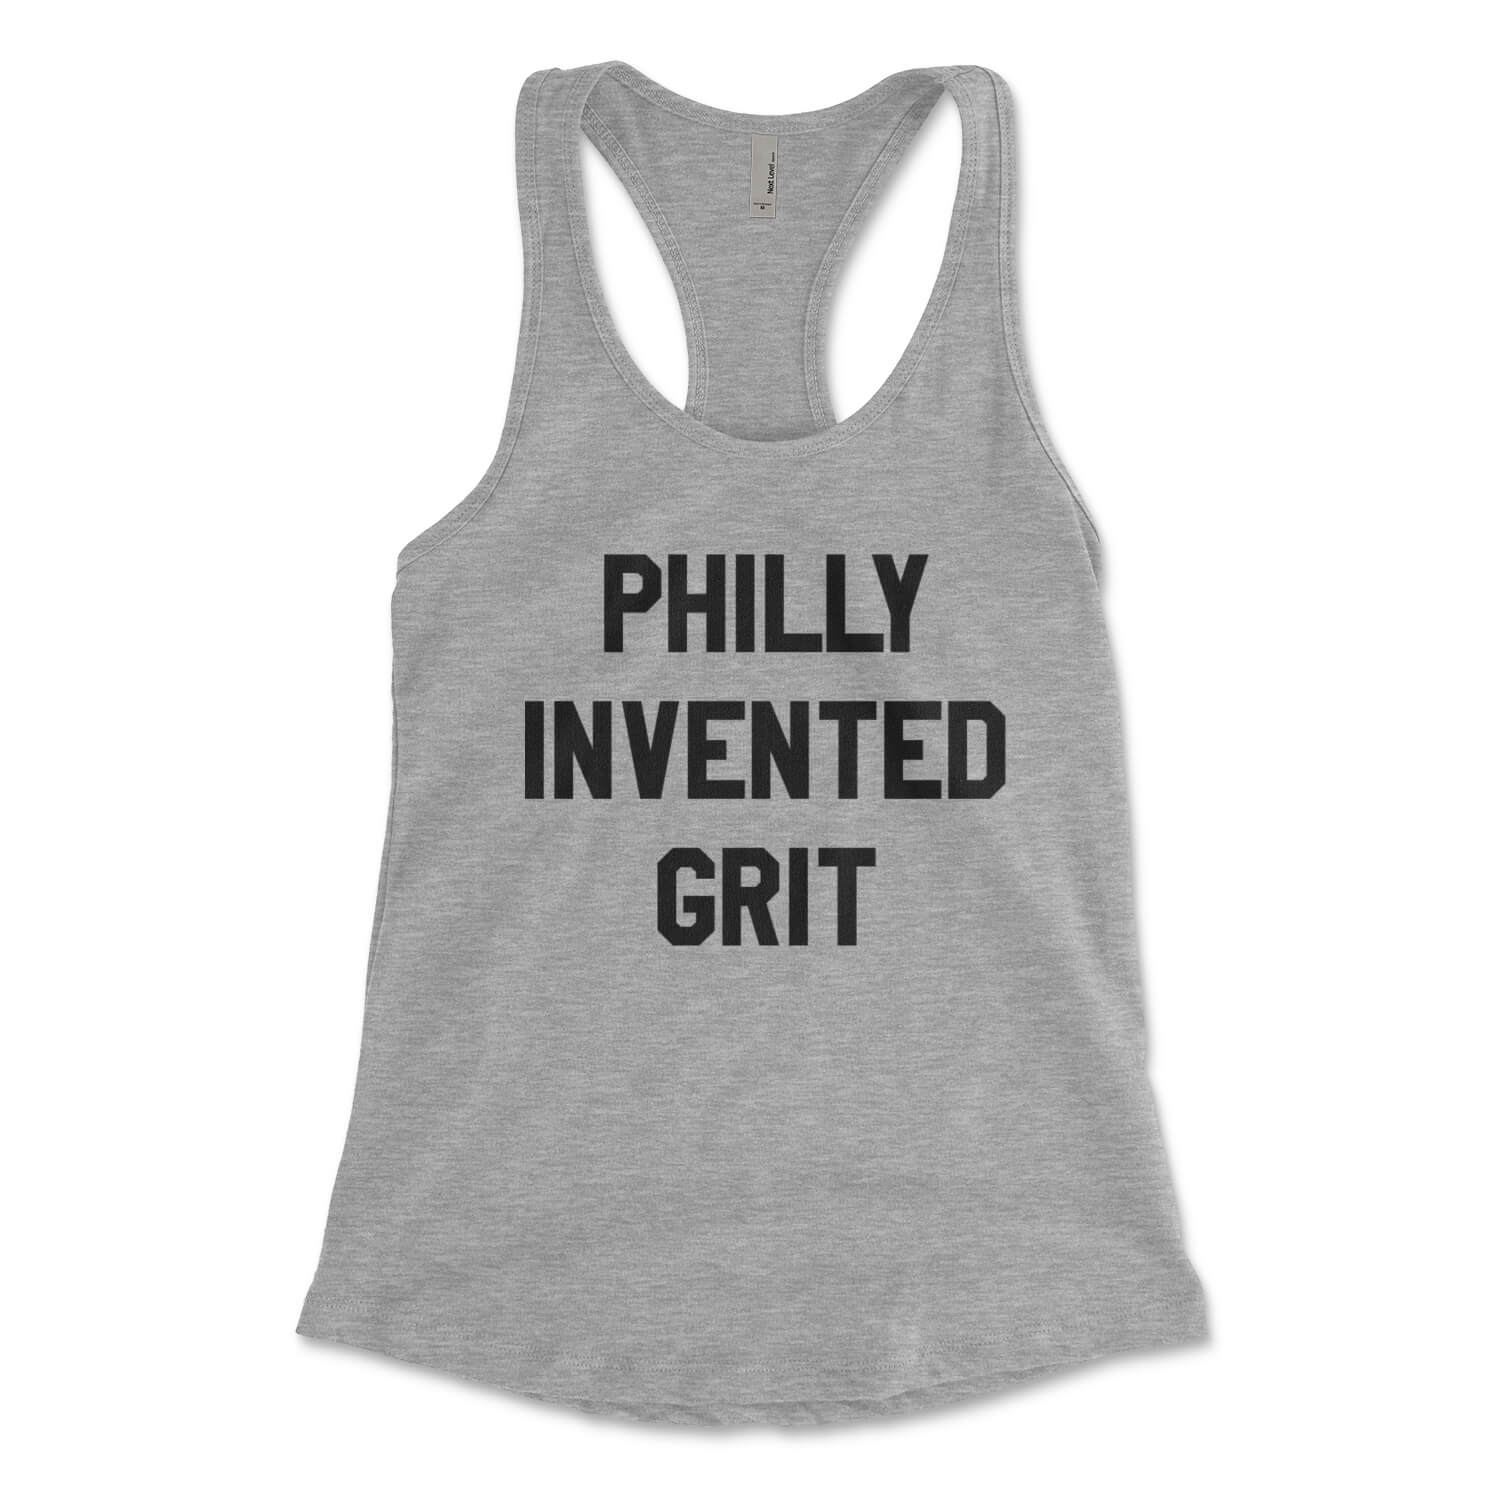 Philly invented grit heather grey womens racerback tank top from Phillygoat